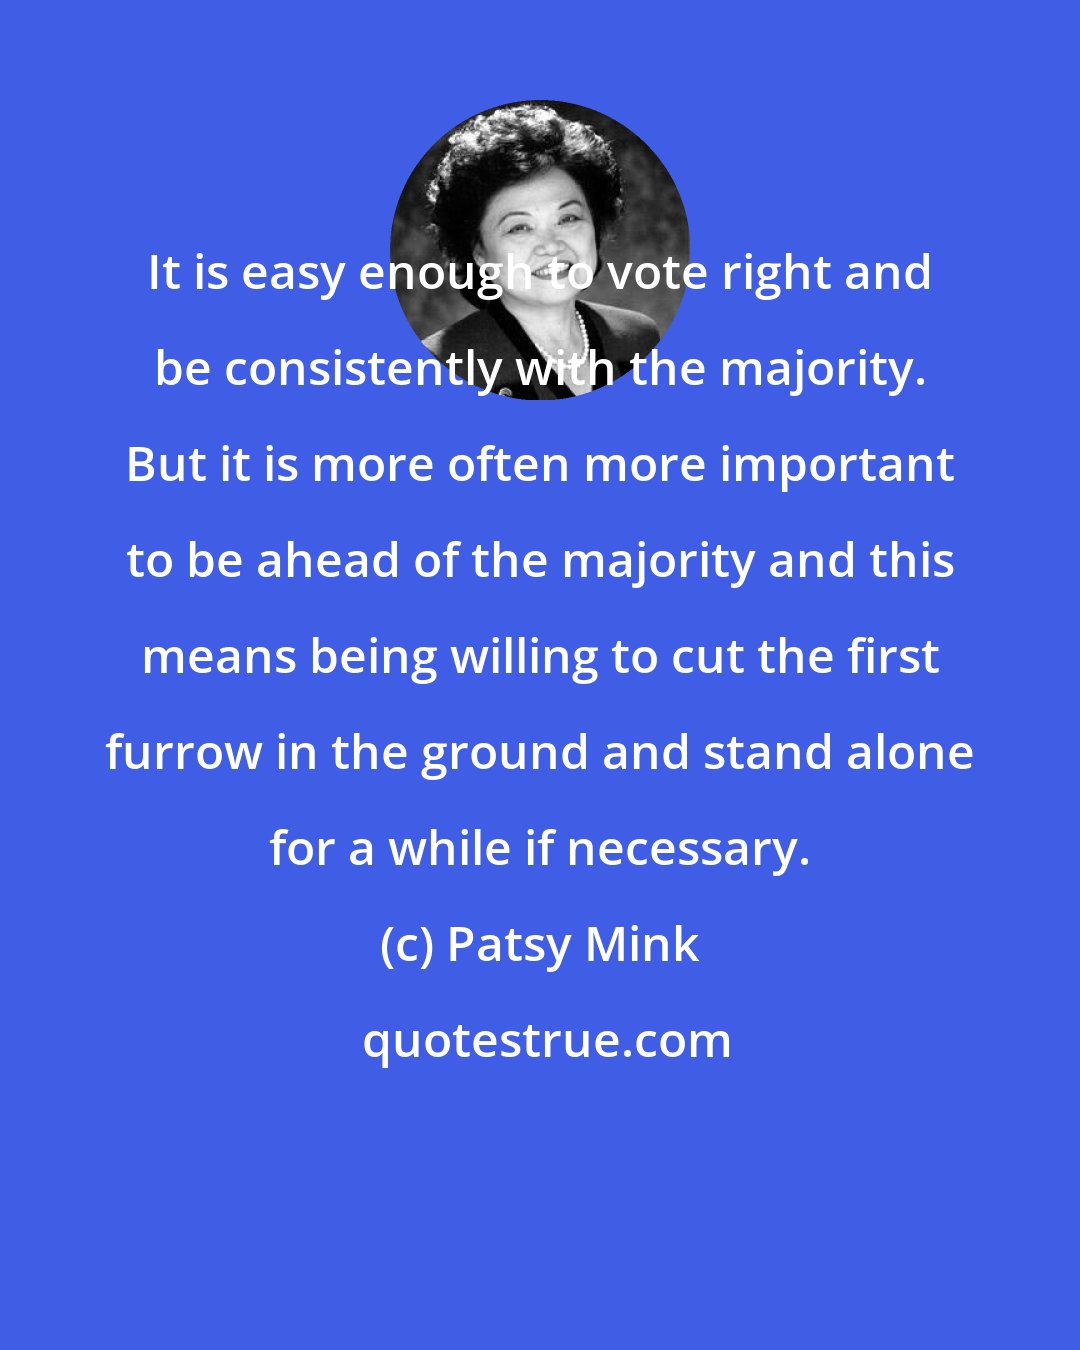 Patsy Mink: It is easy enough to vote right and be consistently with the majority. But it is more often more important to be ahead of the majority and this means being willing to cut the first furrow in the ground and stand alone for a while if necessary.